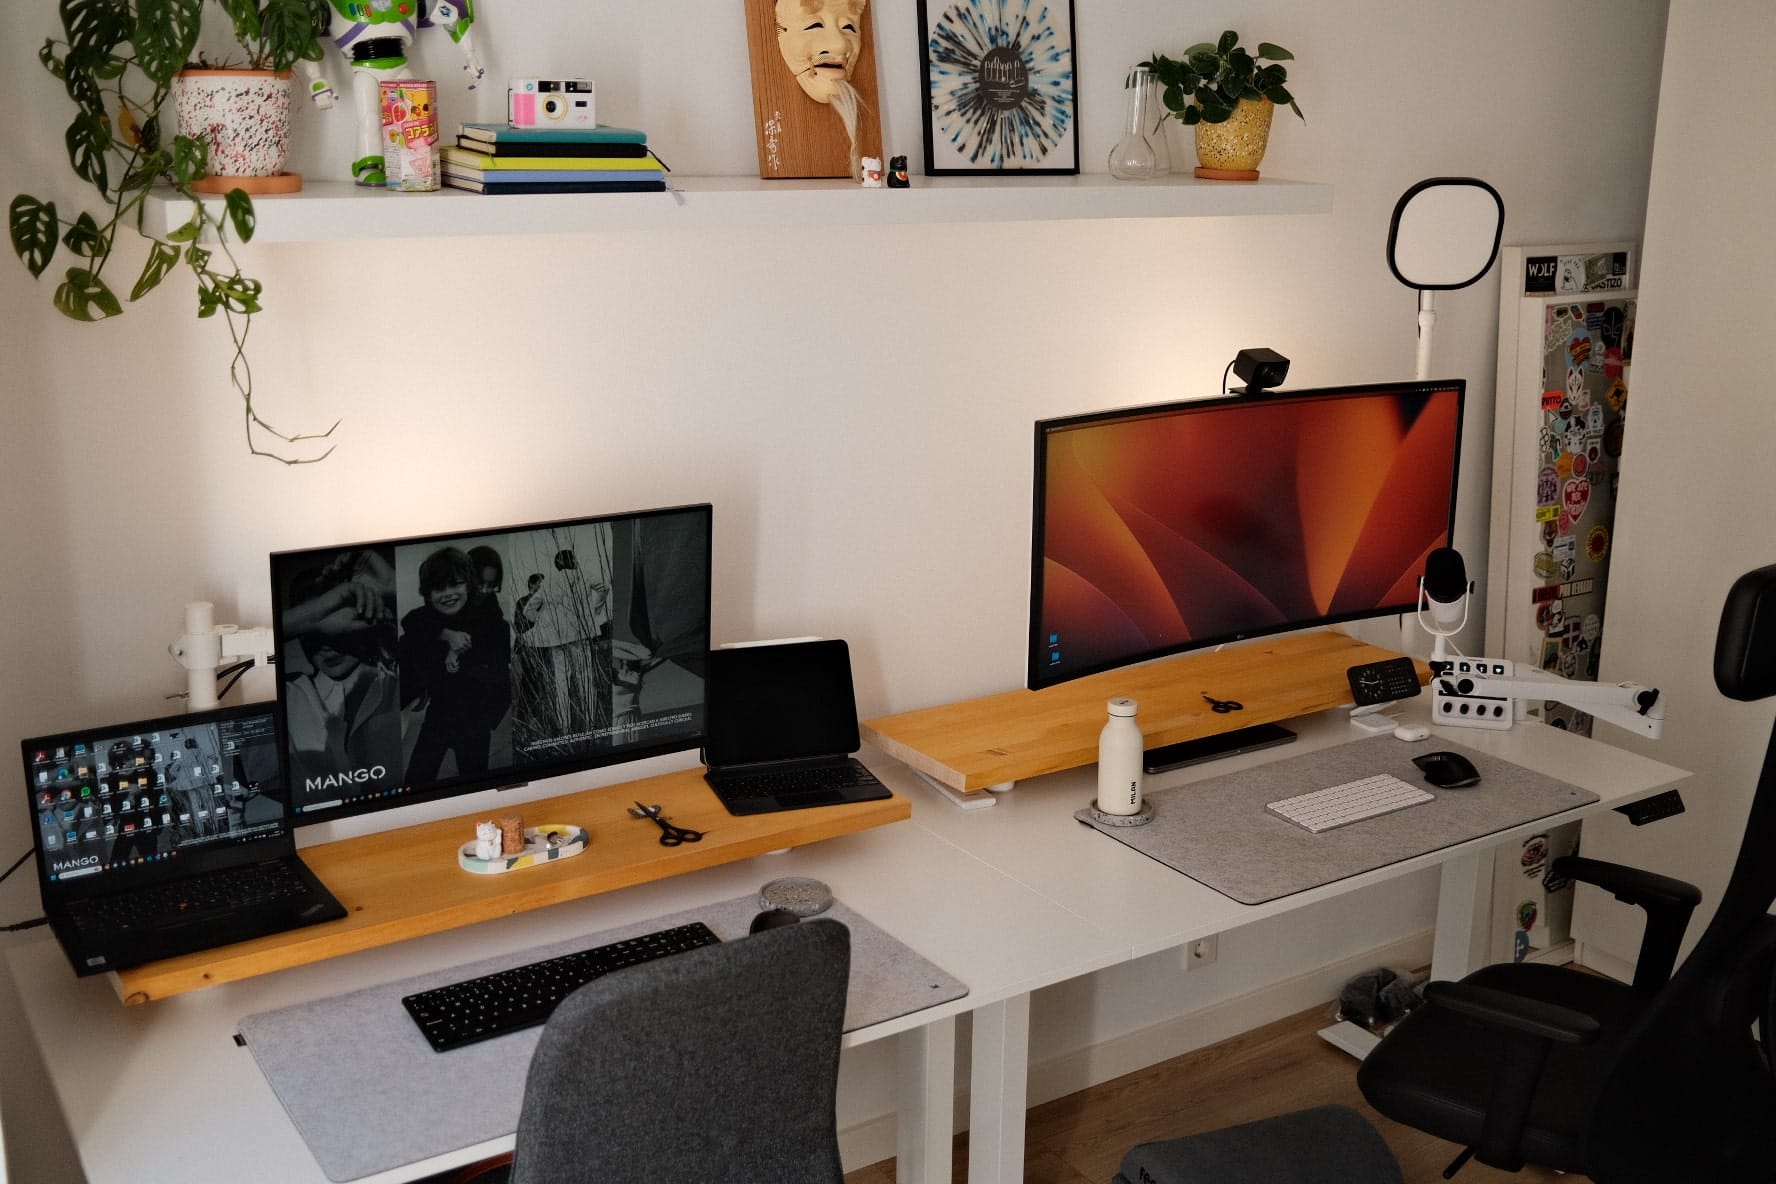 A shared home office featuring a long desk with two monitors, a laptop, decorative shelf with plants, books, and toys, a ring light, and two ergonomic chairs